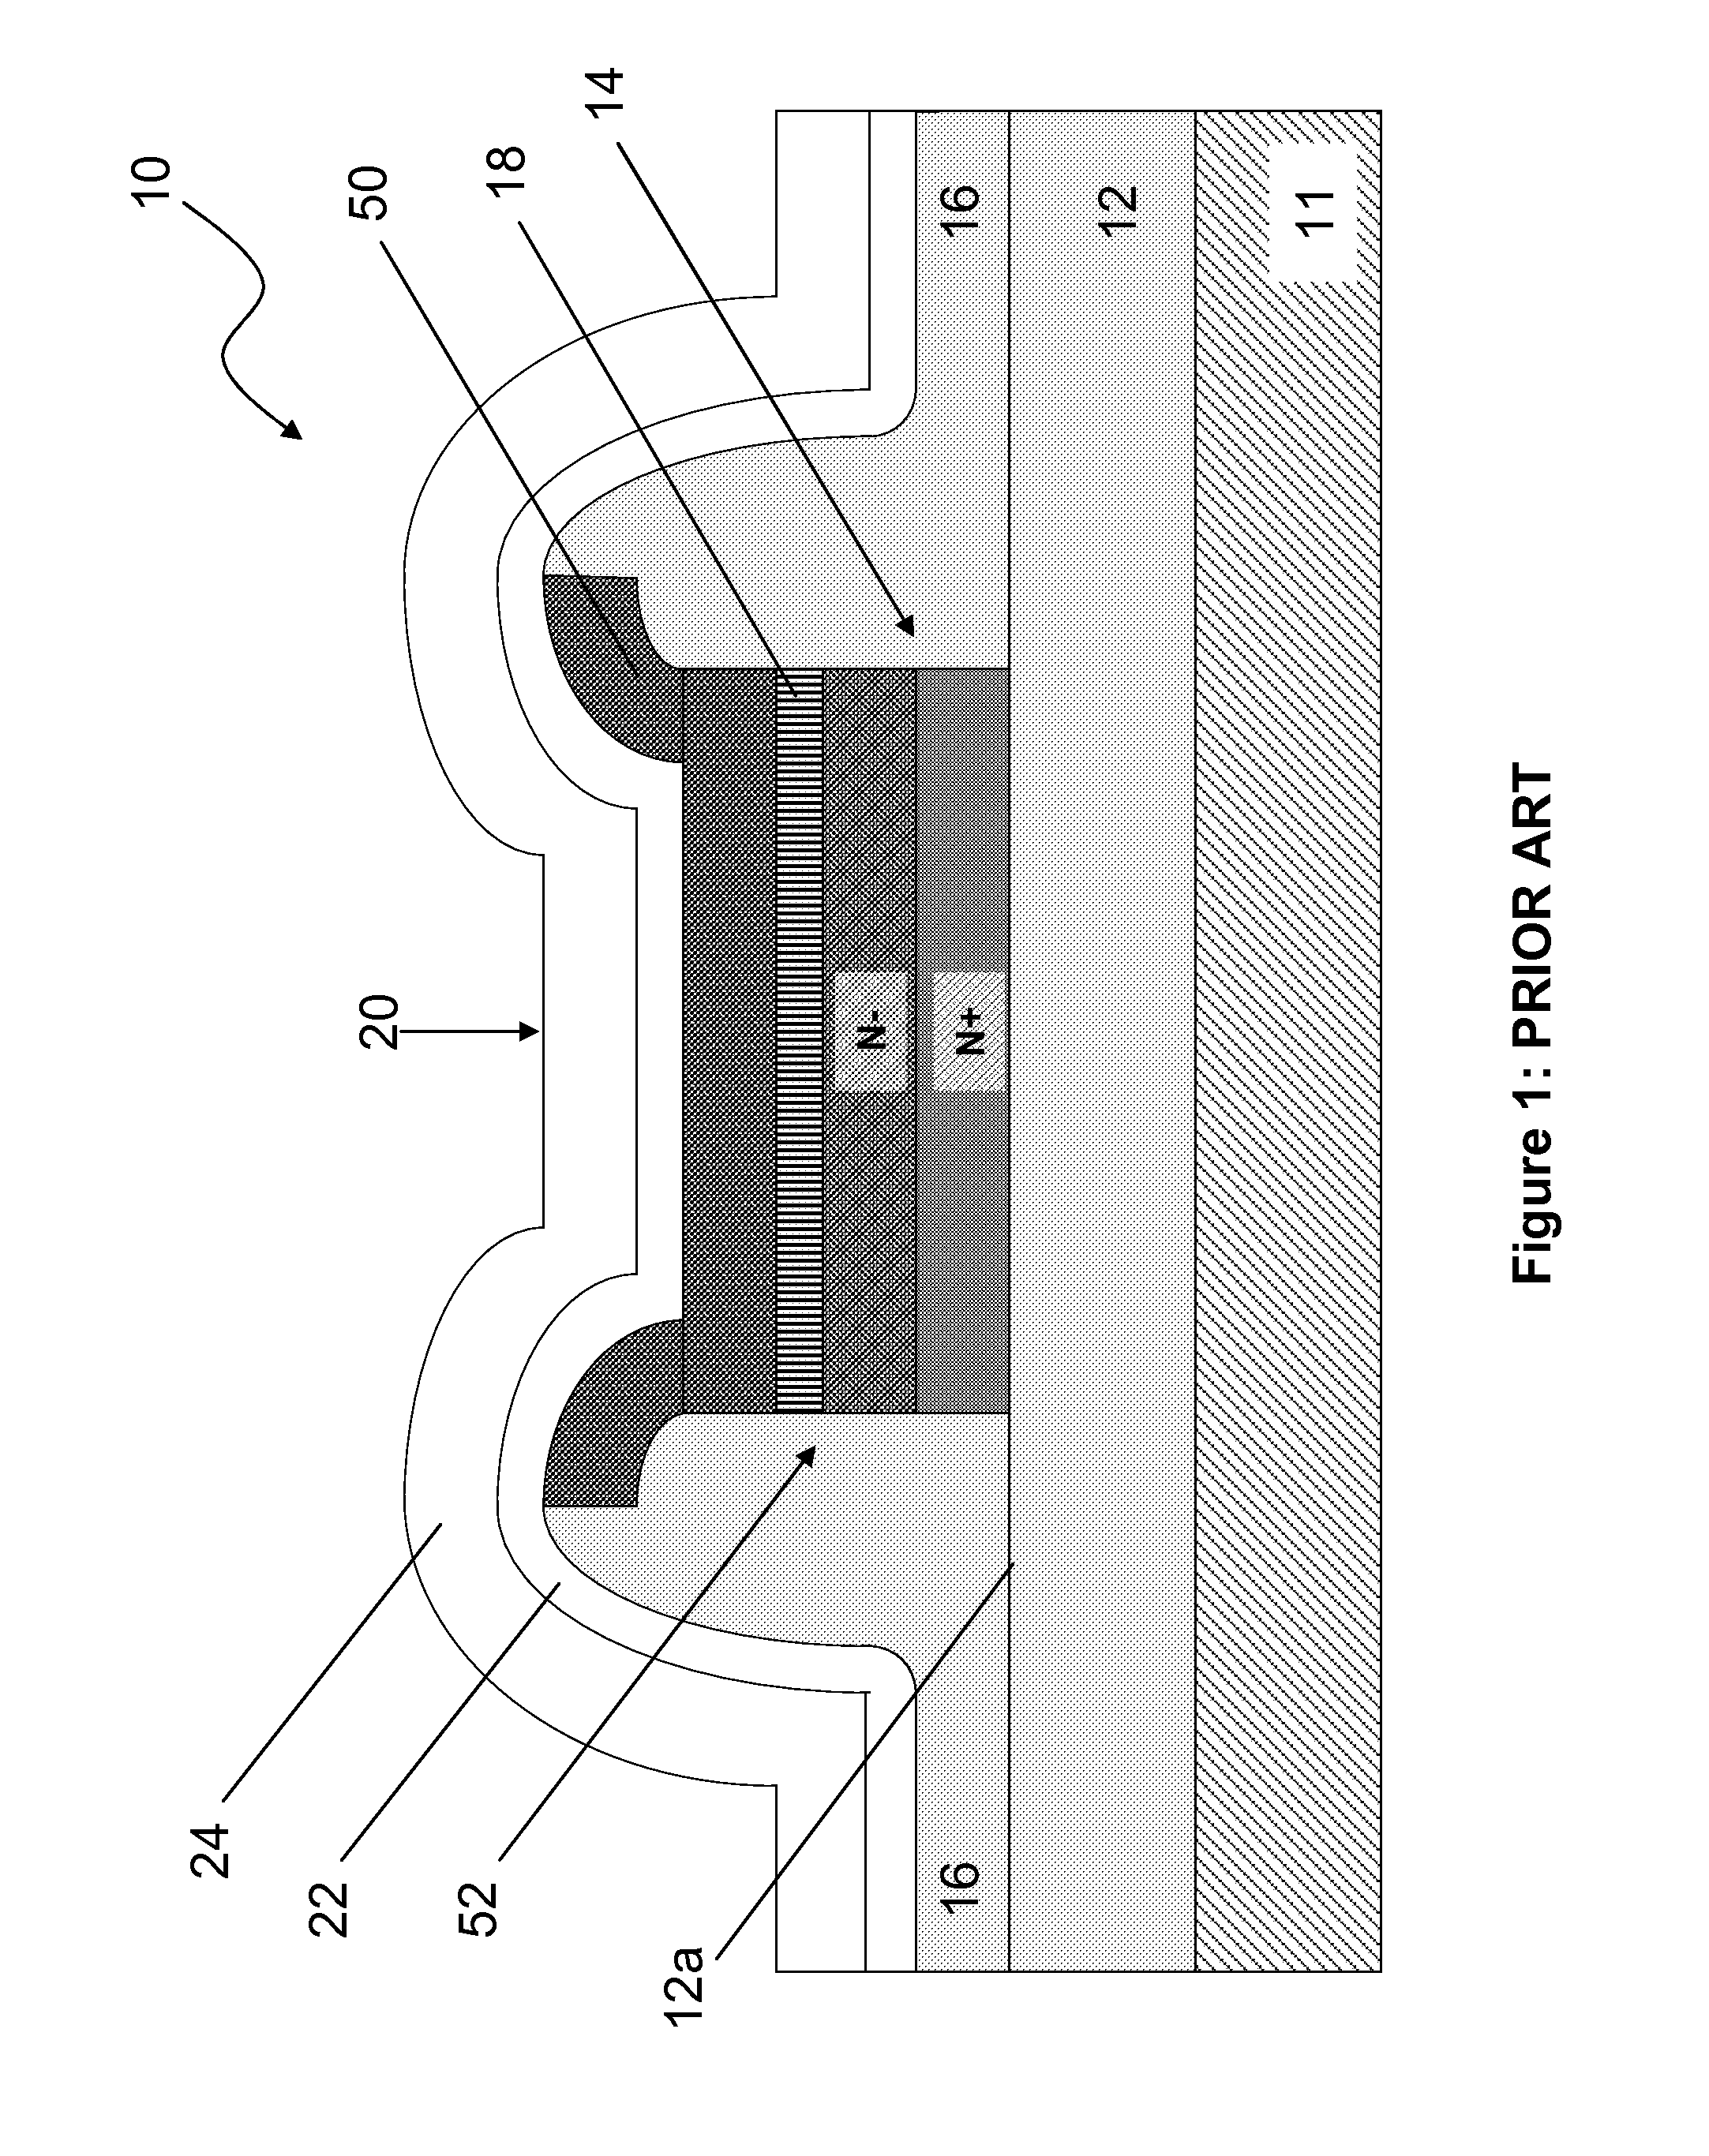 Carbon based nonvolatile cross point memory incorporating carbon based diode select devices and MOSFET select devices for memory and logic applications